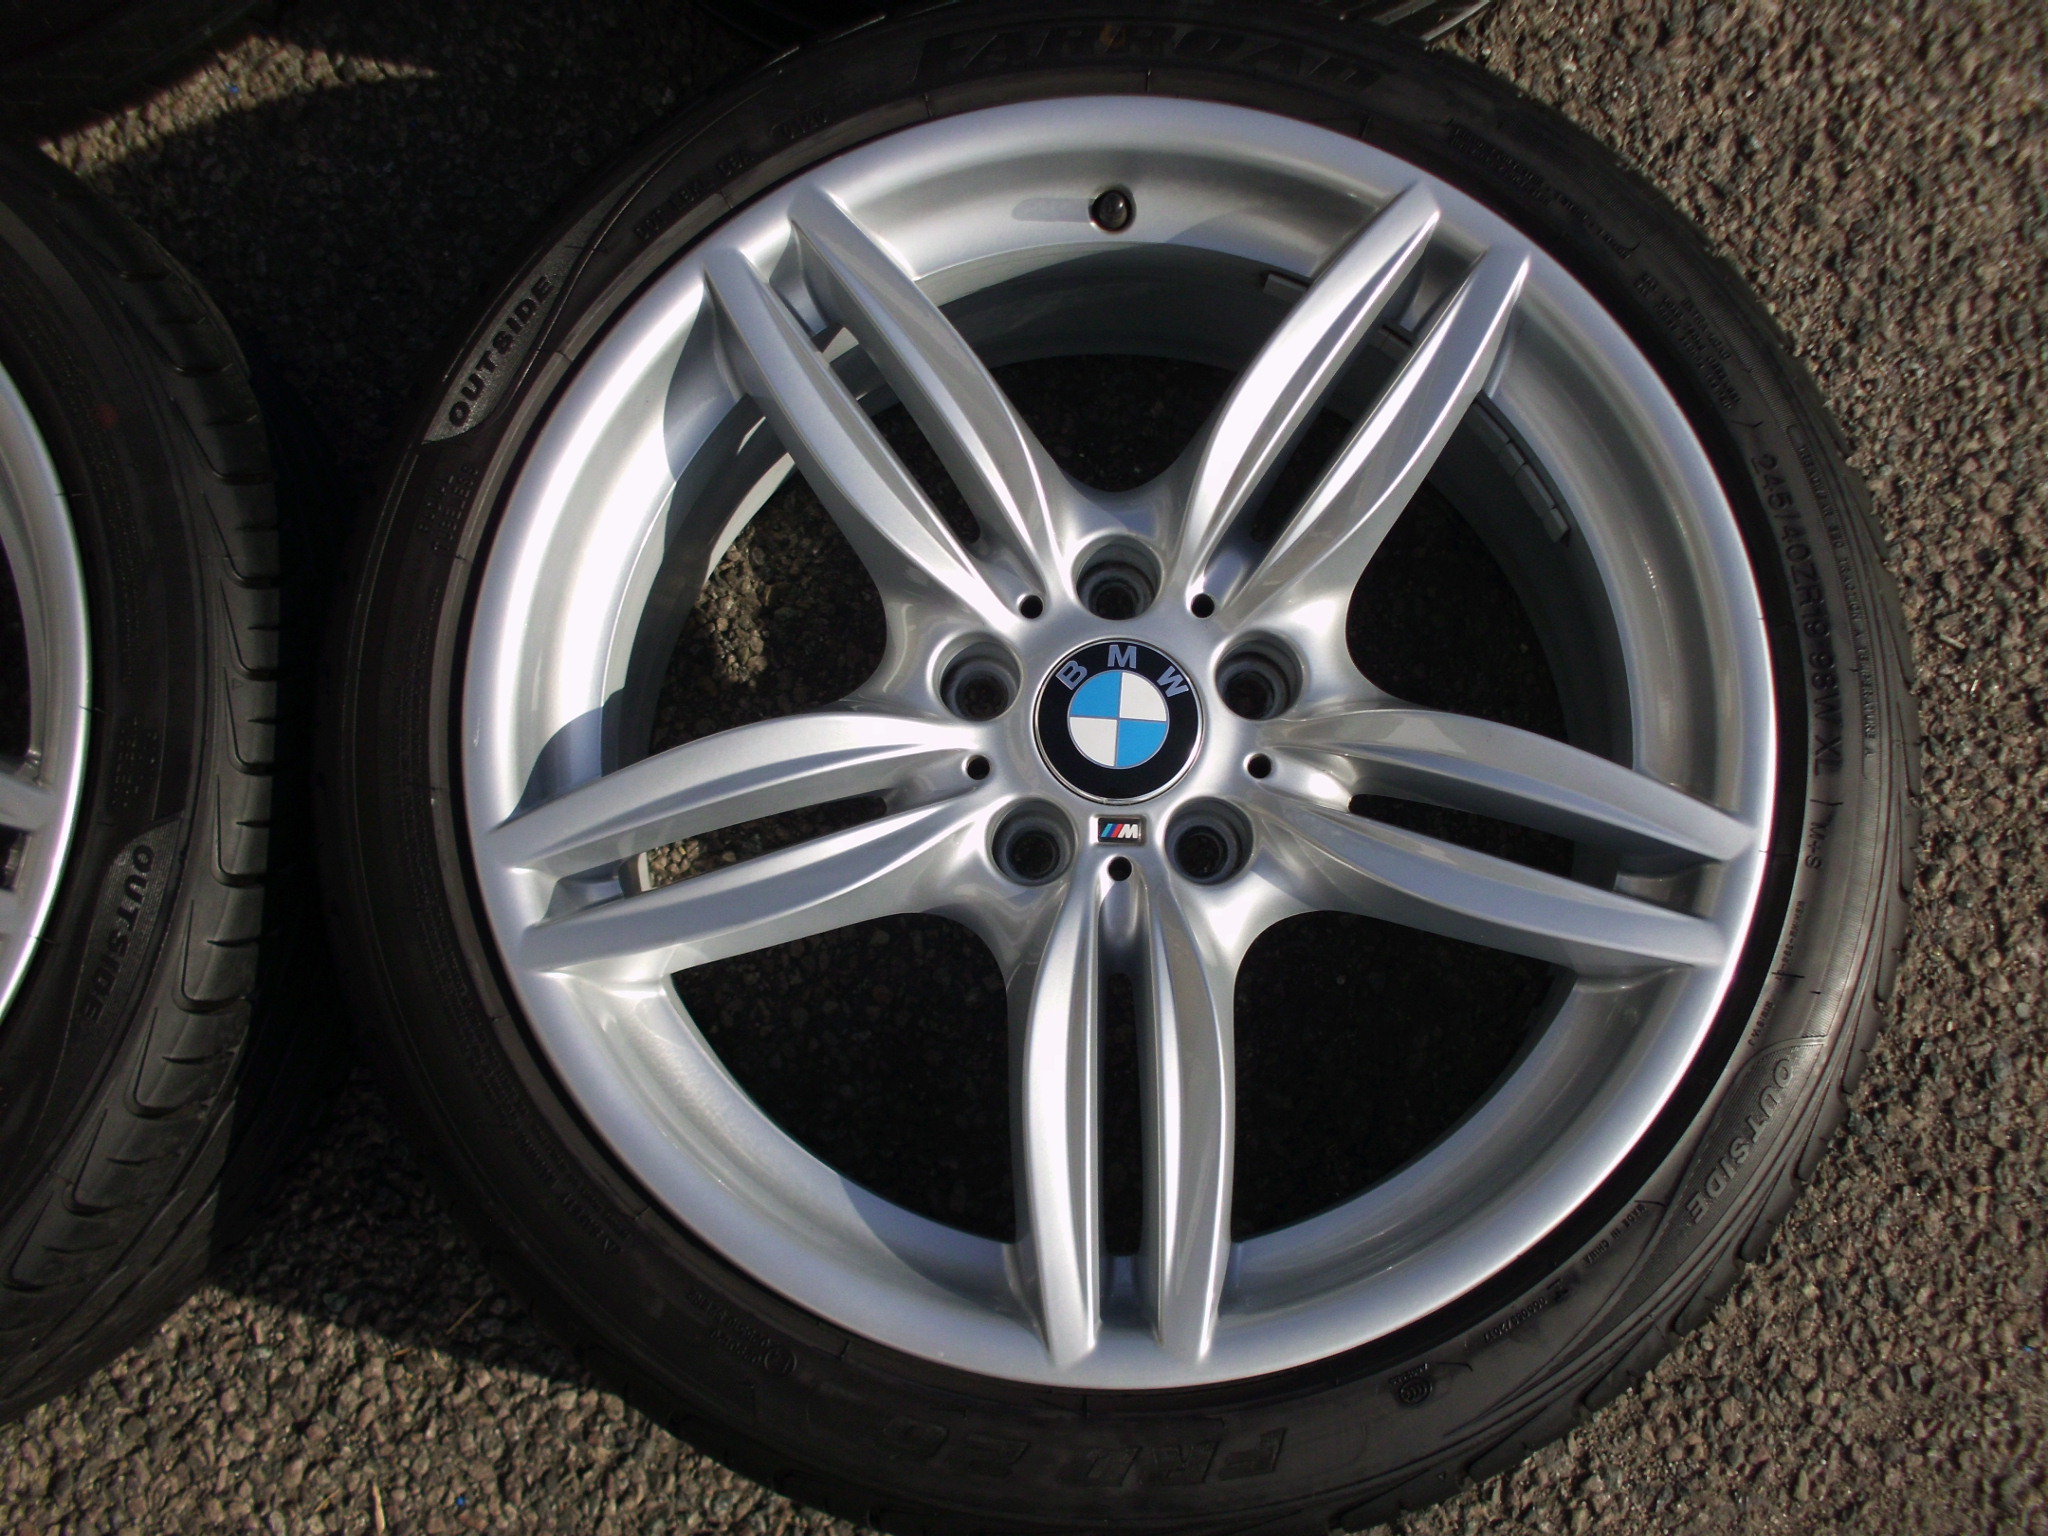 USED 19" GENUINE BMW STYLE 351 F10 M SPORT ALLOY WHEELS, EXCELLENT CONDITION WITH WIDE REARS INC GOOD NON RUNFLAT TYRES